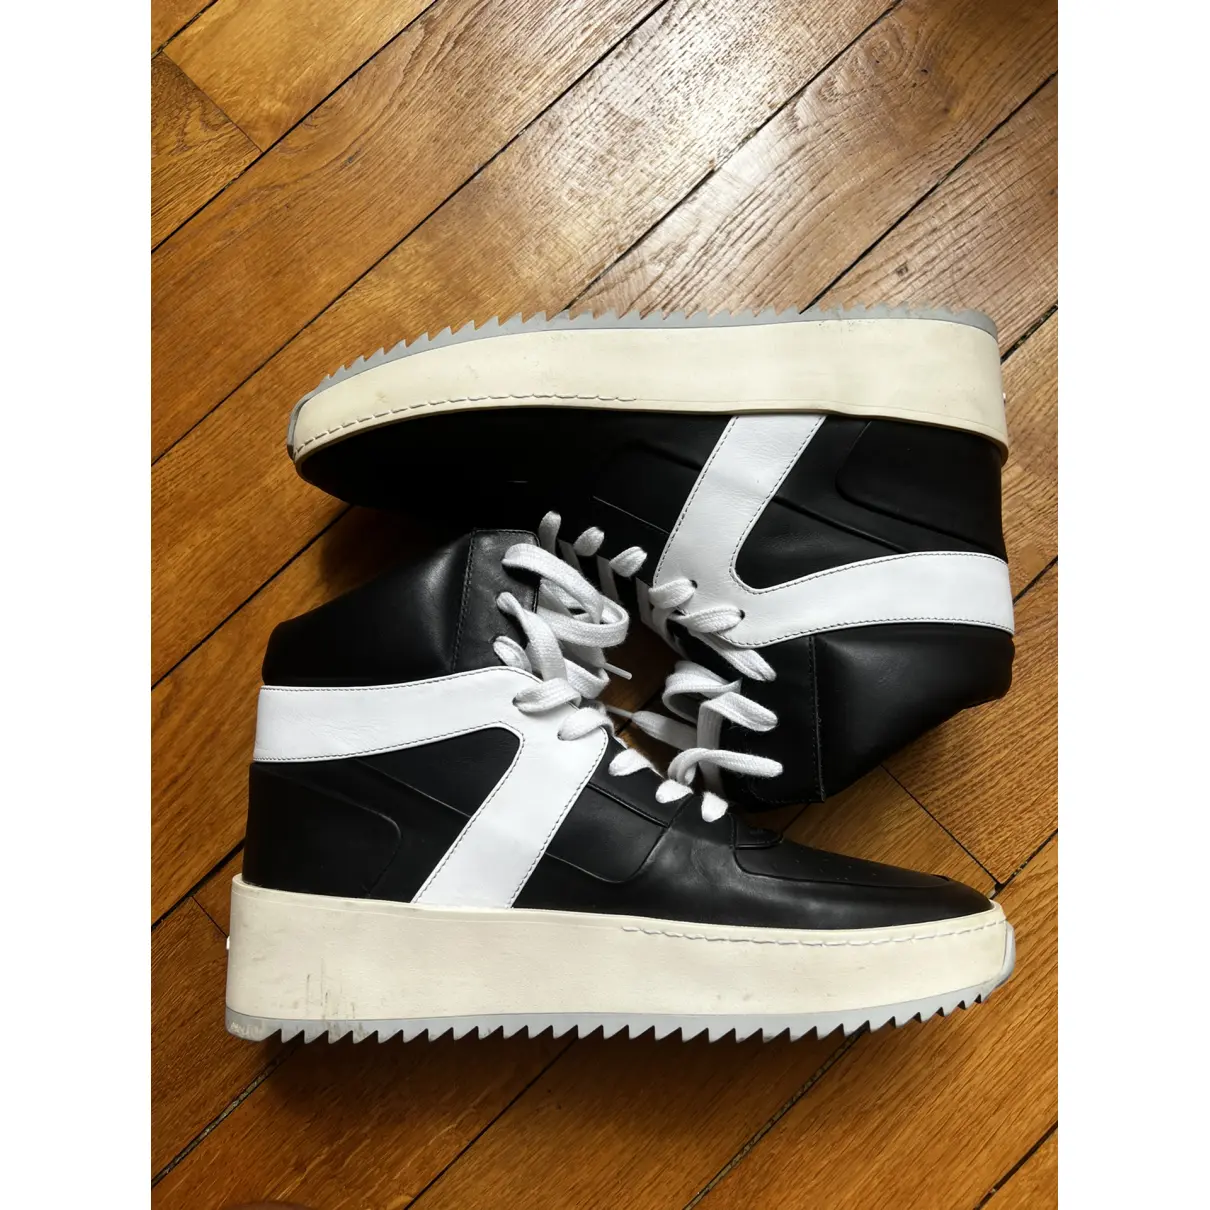 Buy Fear of God FithCollection leather high trainers online